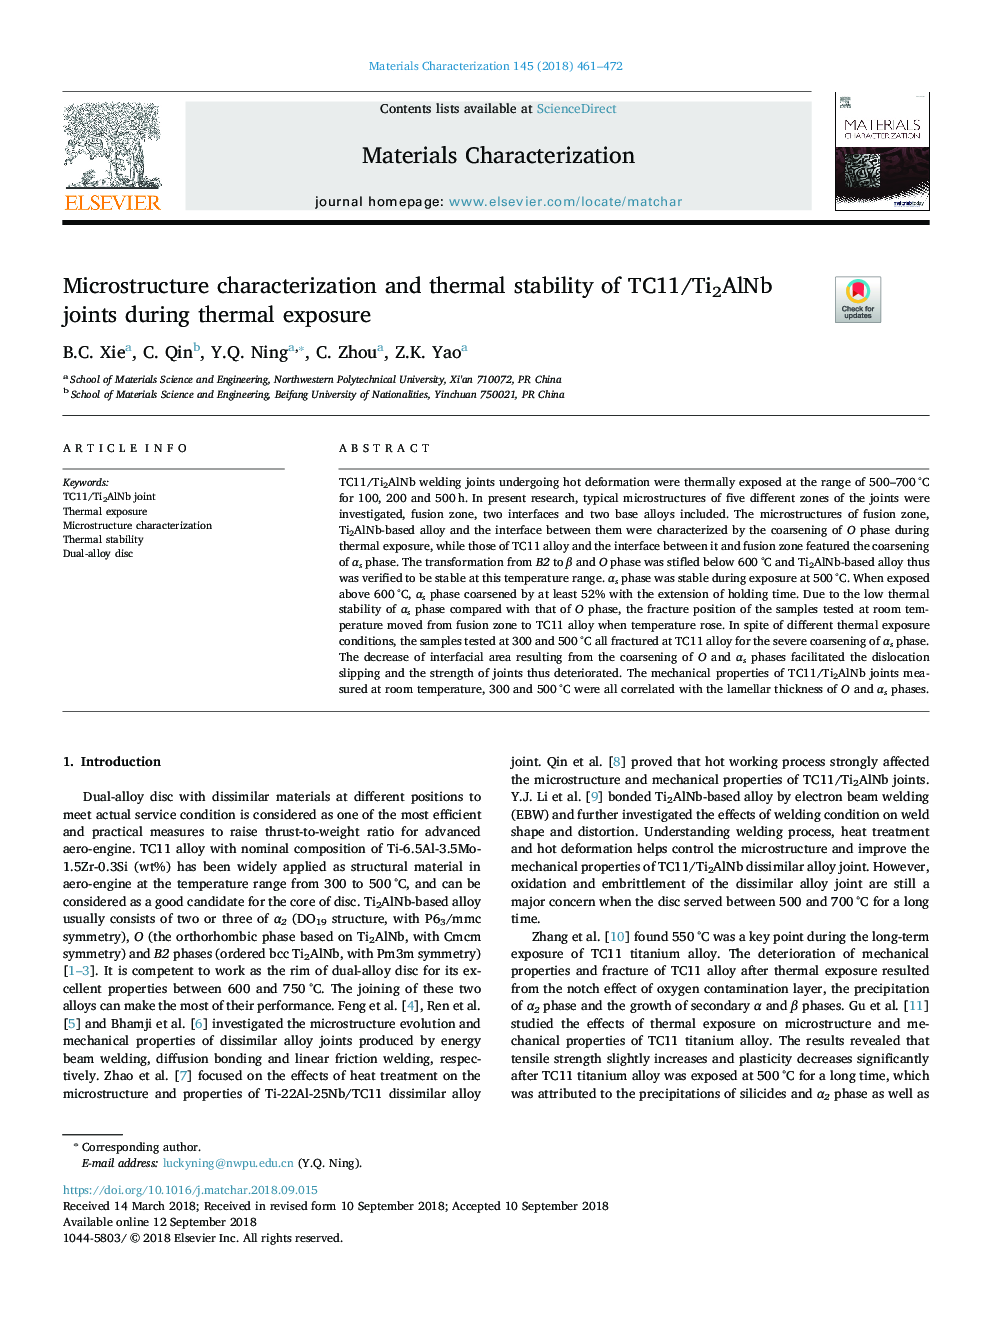 Microstructure characterization and thermal stability of TC11/Ti2AlNb joints during thermal exposure